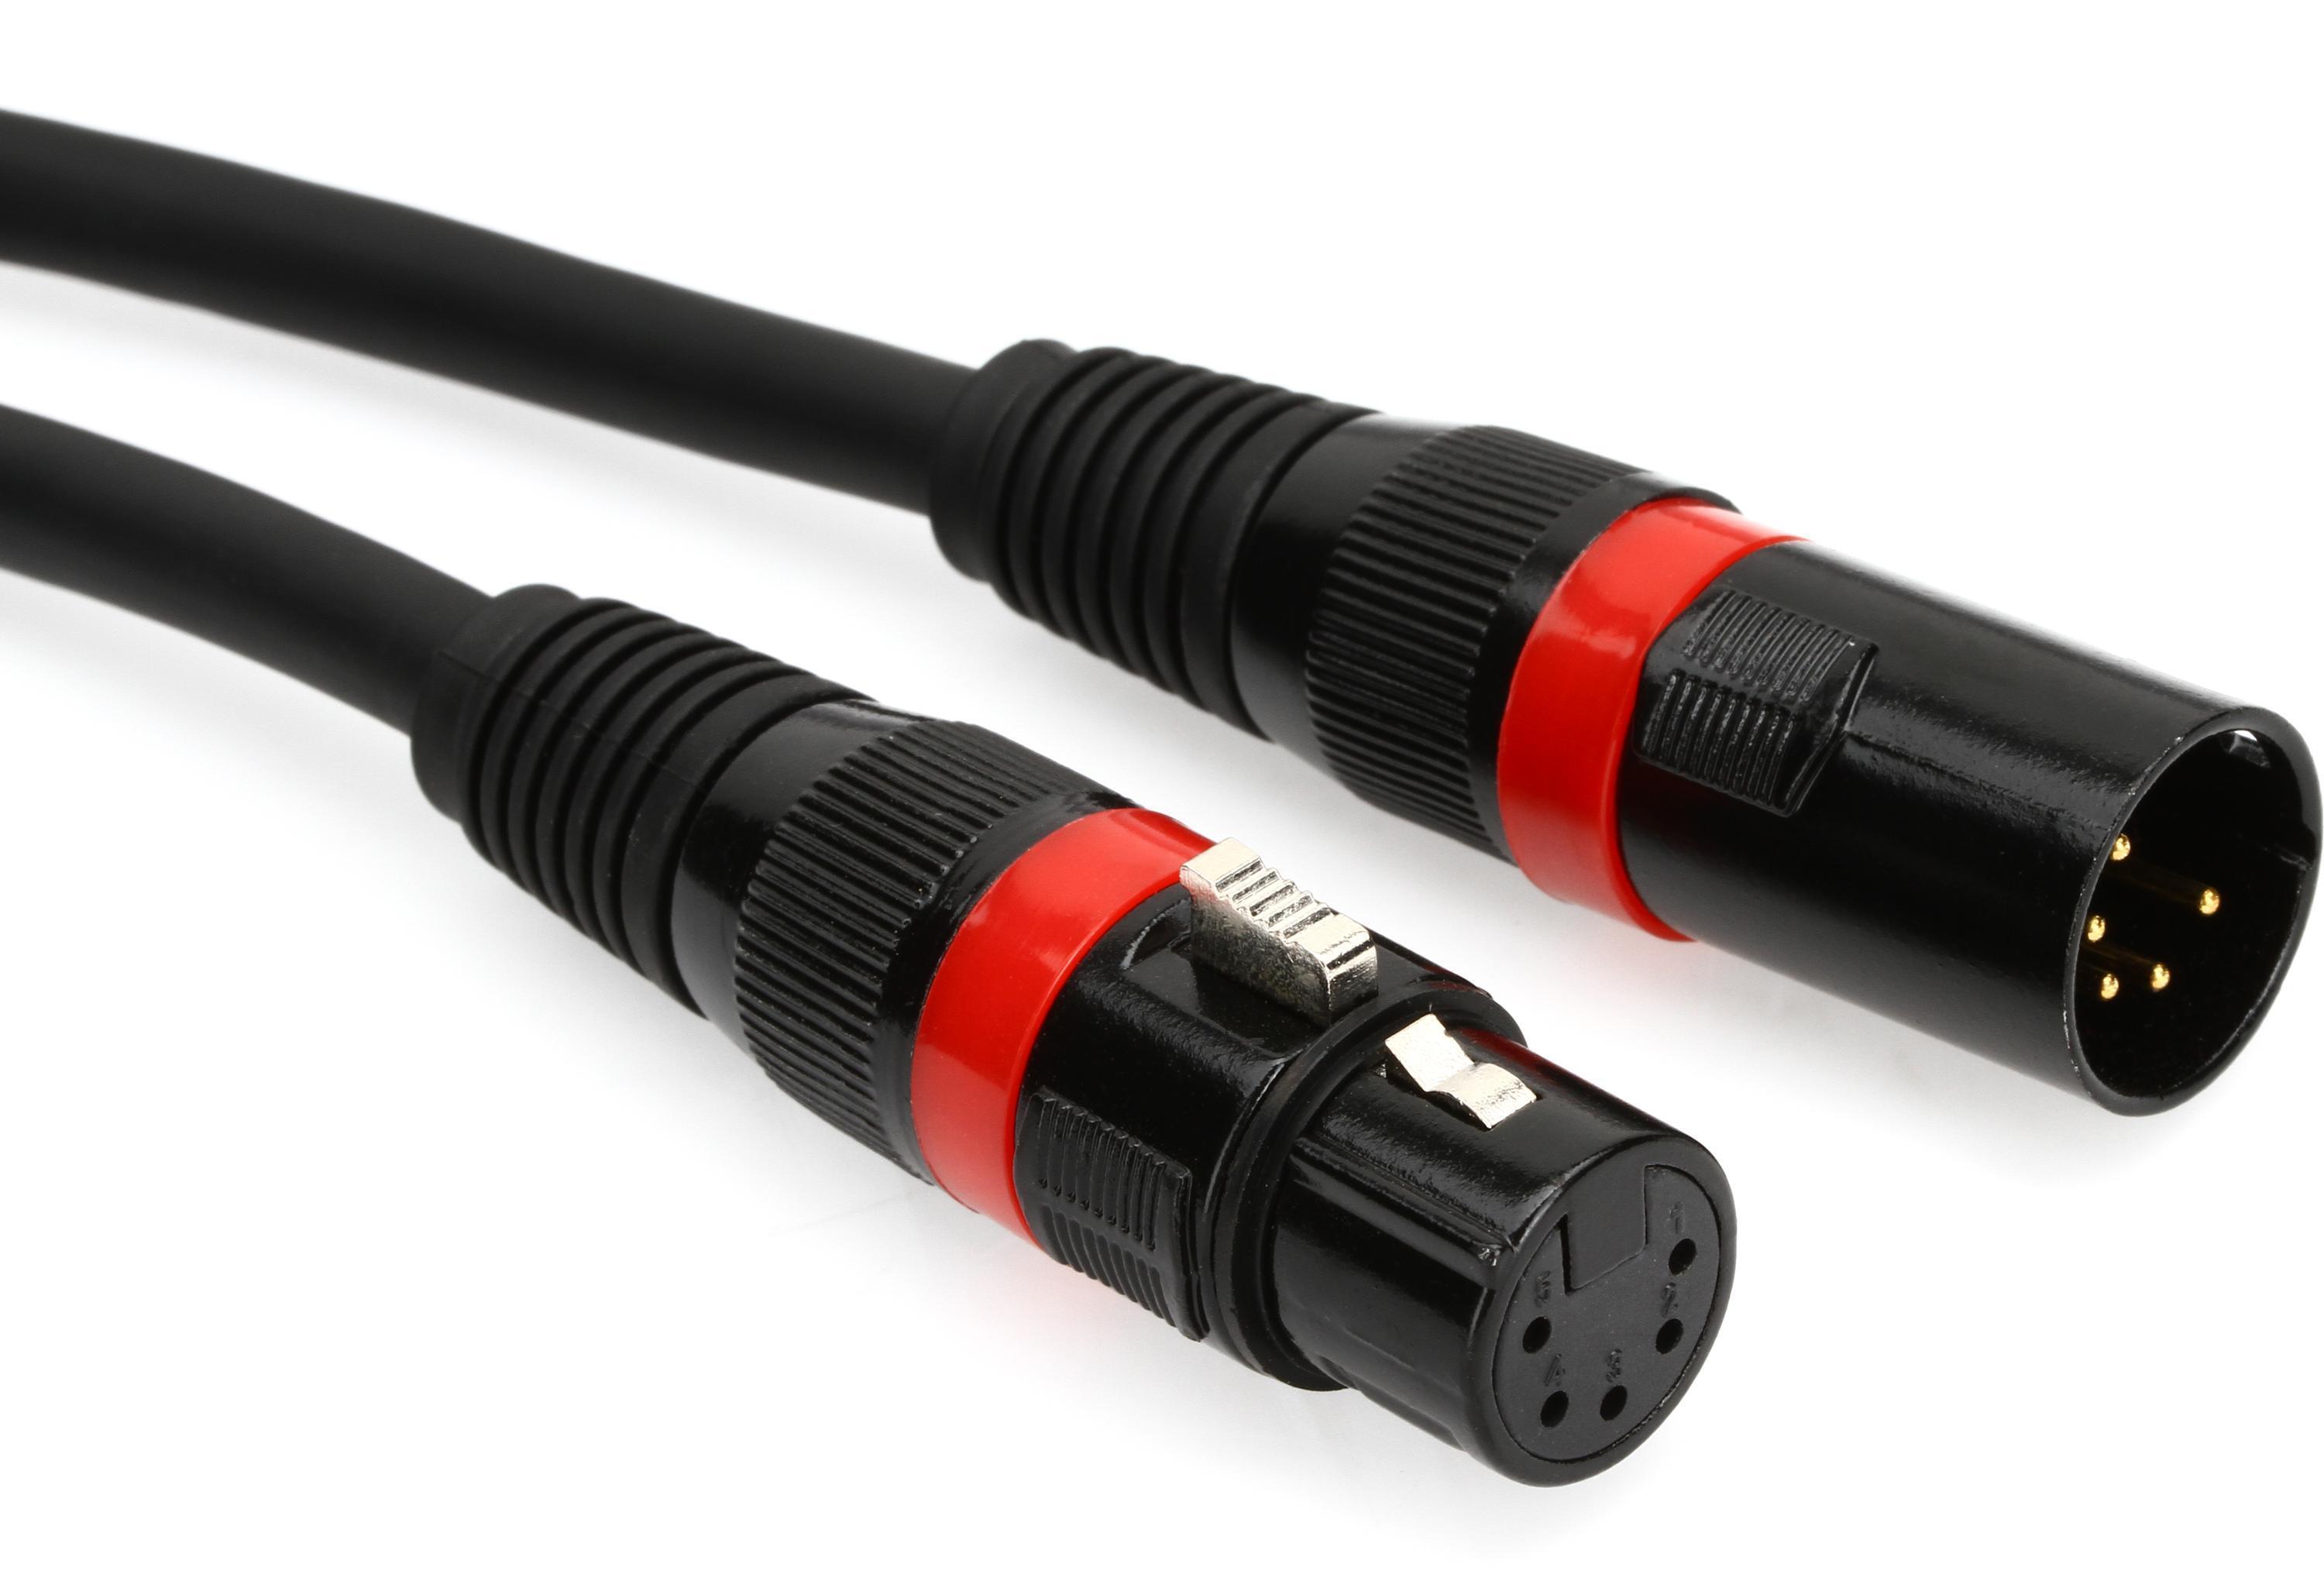 Accu-Cable AC5PDMX5 5-pin/5-conductor DMX Cable - 5 foot